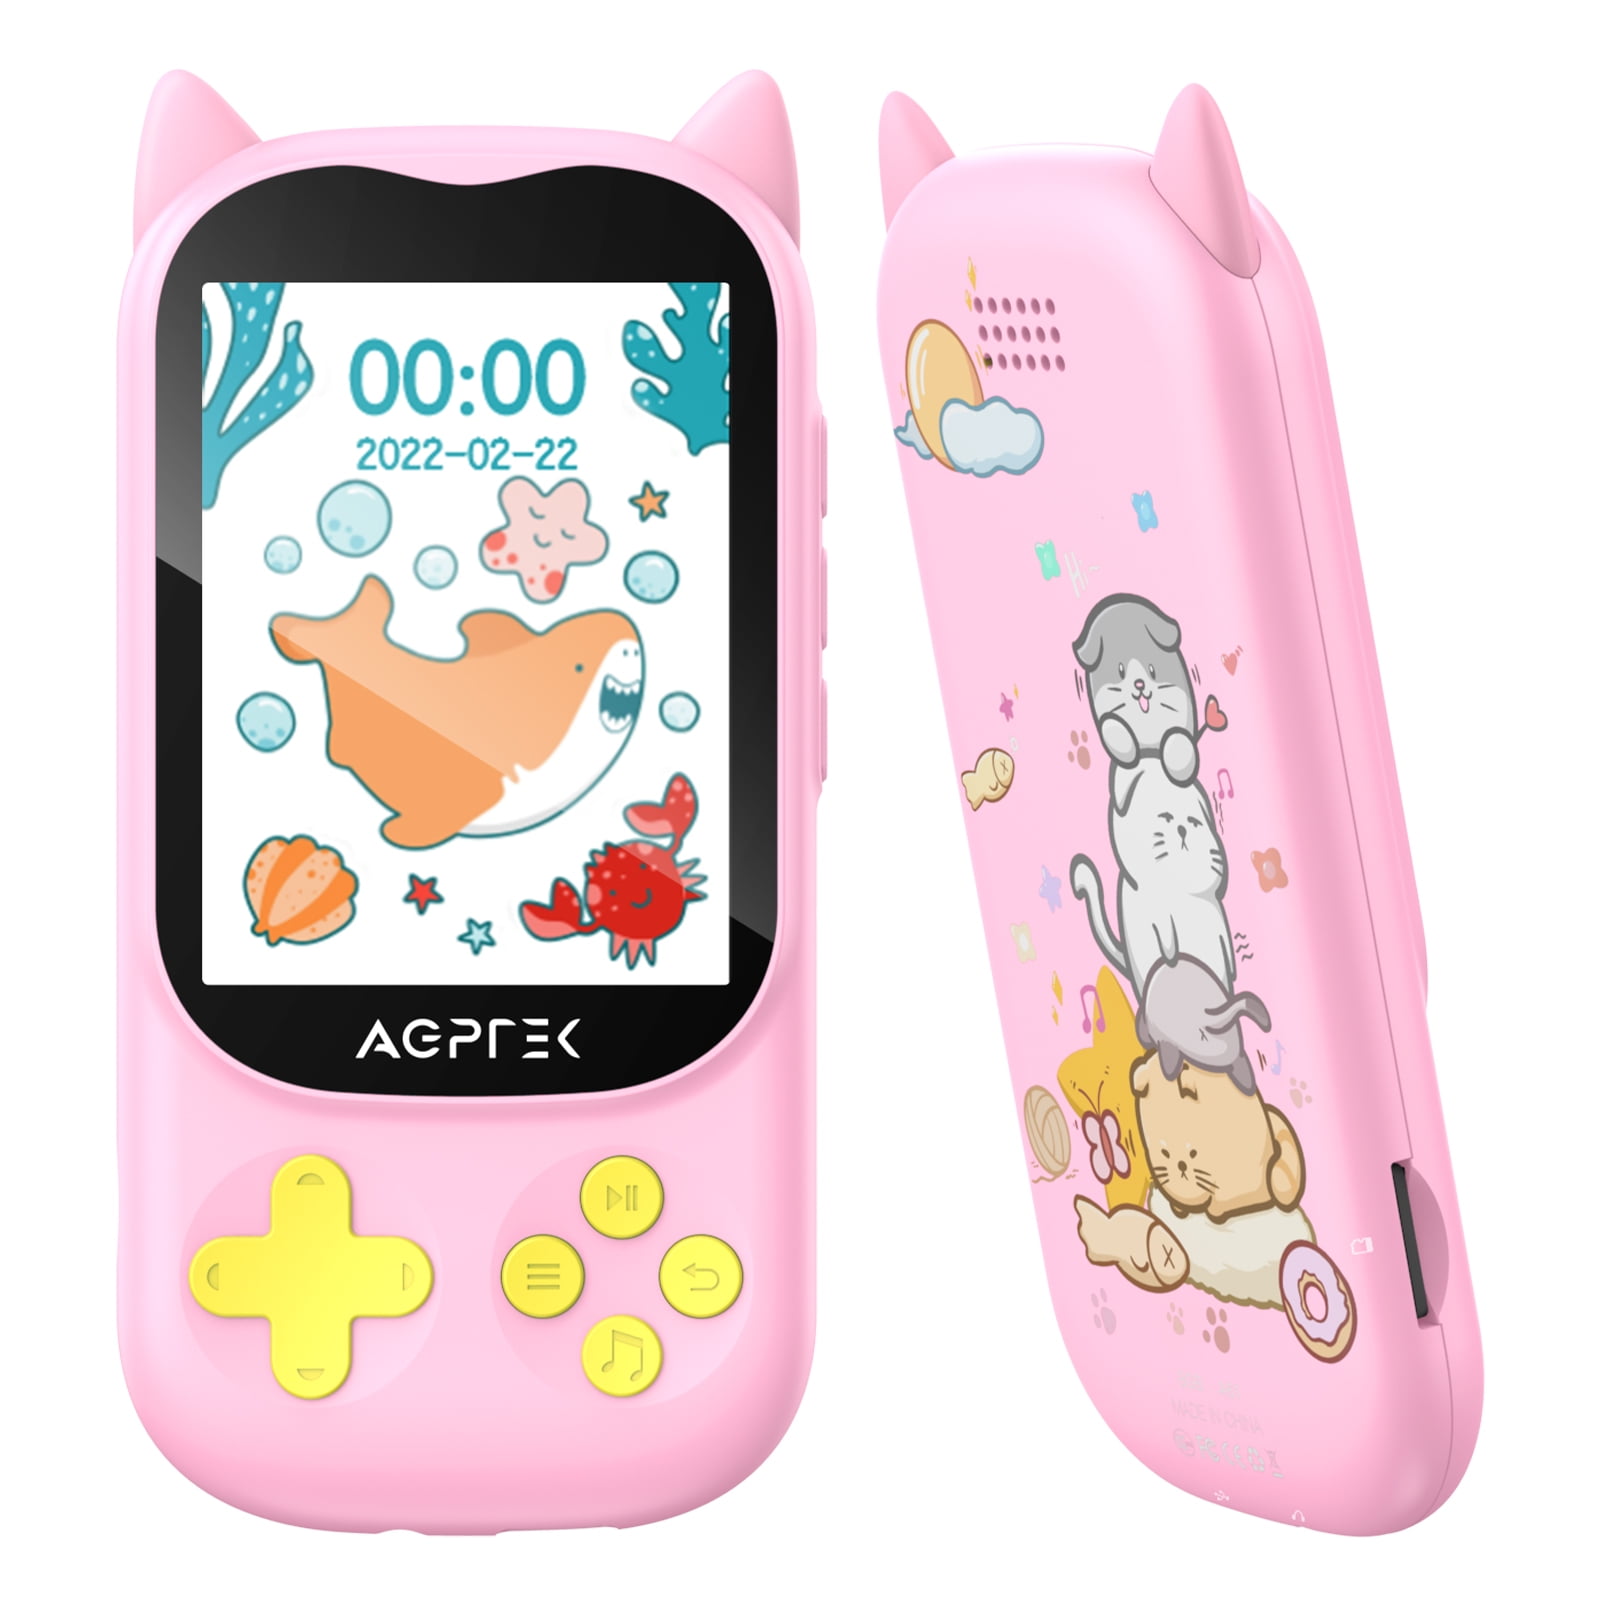 AGPTEK MP3 Player for Kids, Portable 8GB Music Player with Built-in  Speaker, FM Radio, Voice Recorder, Expandable Up to 128GB, Rose  Gold/Blue,K1